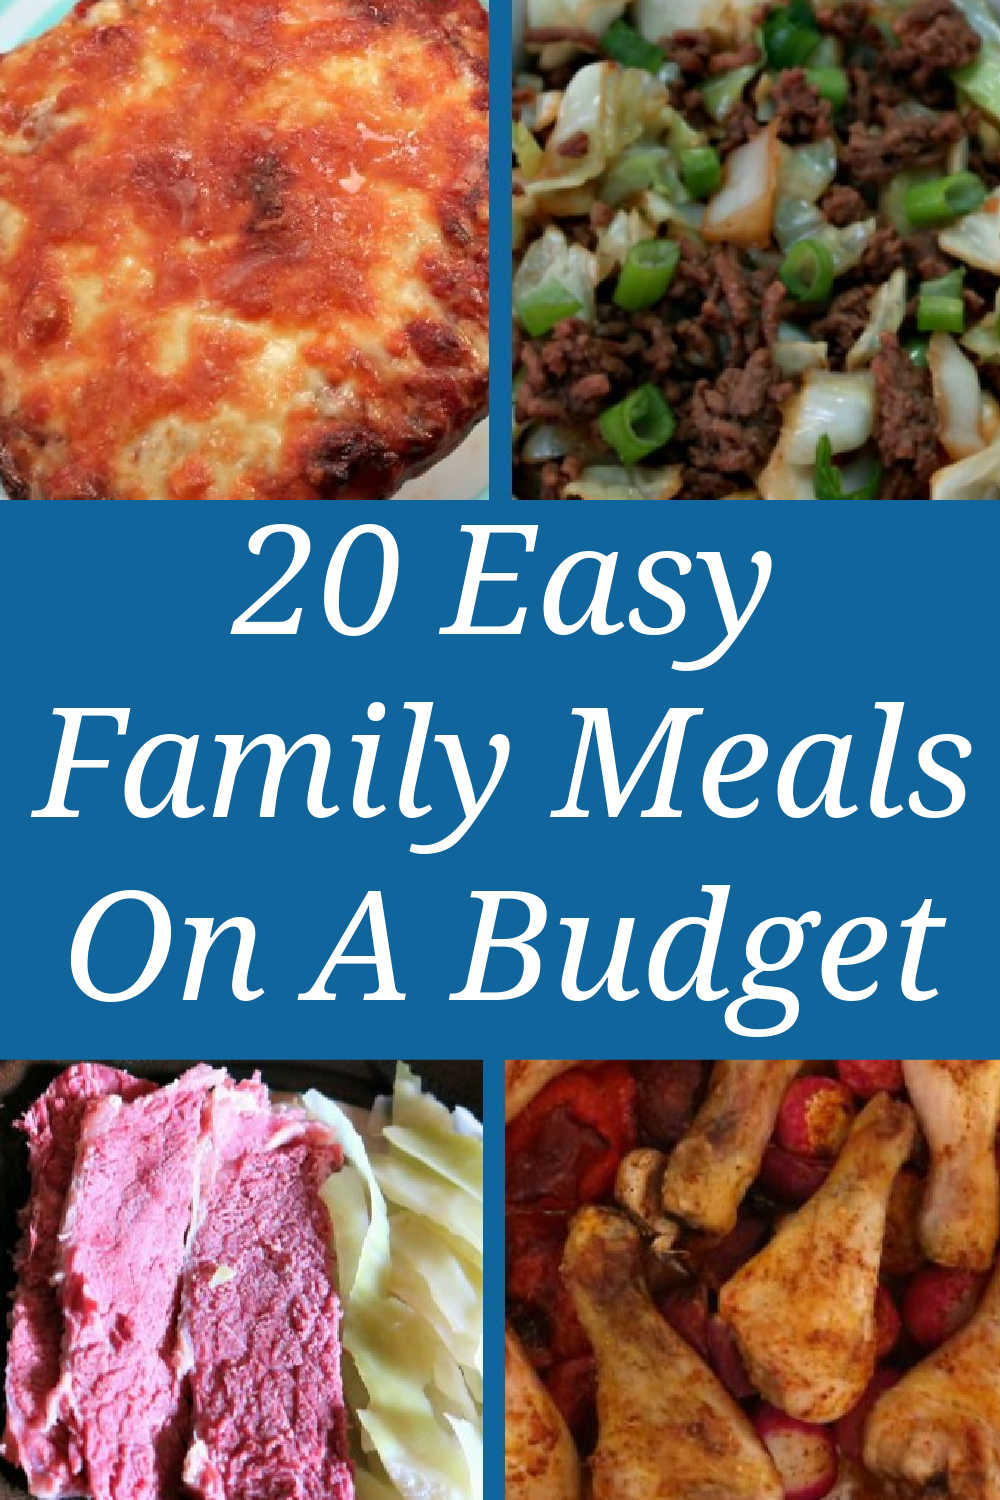 20 Family Meals On A Budget - Best Cheap & Easy Dinner Menu Ideas For The Week - extremely frugal friendly & simple recipes for your weekly menu - picky eater approved.